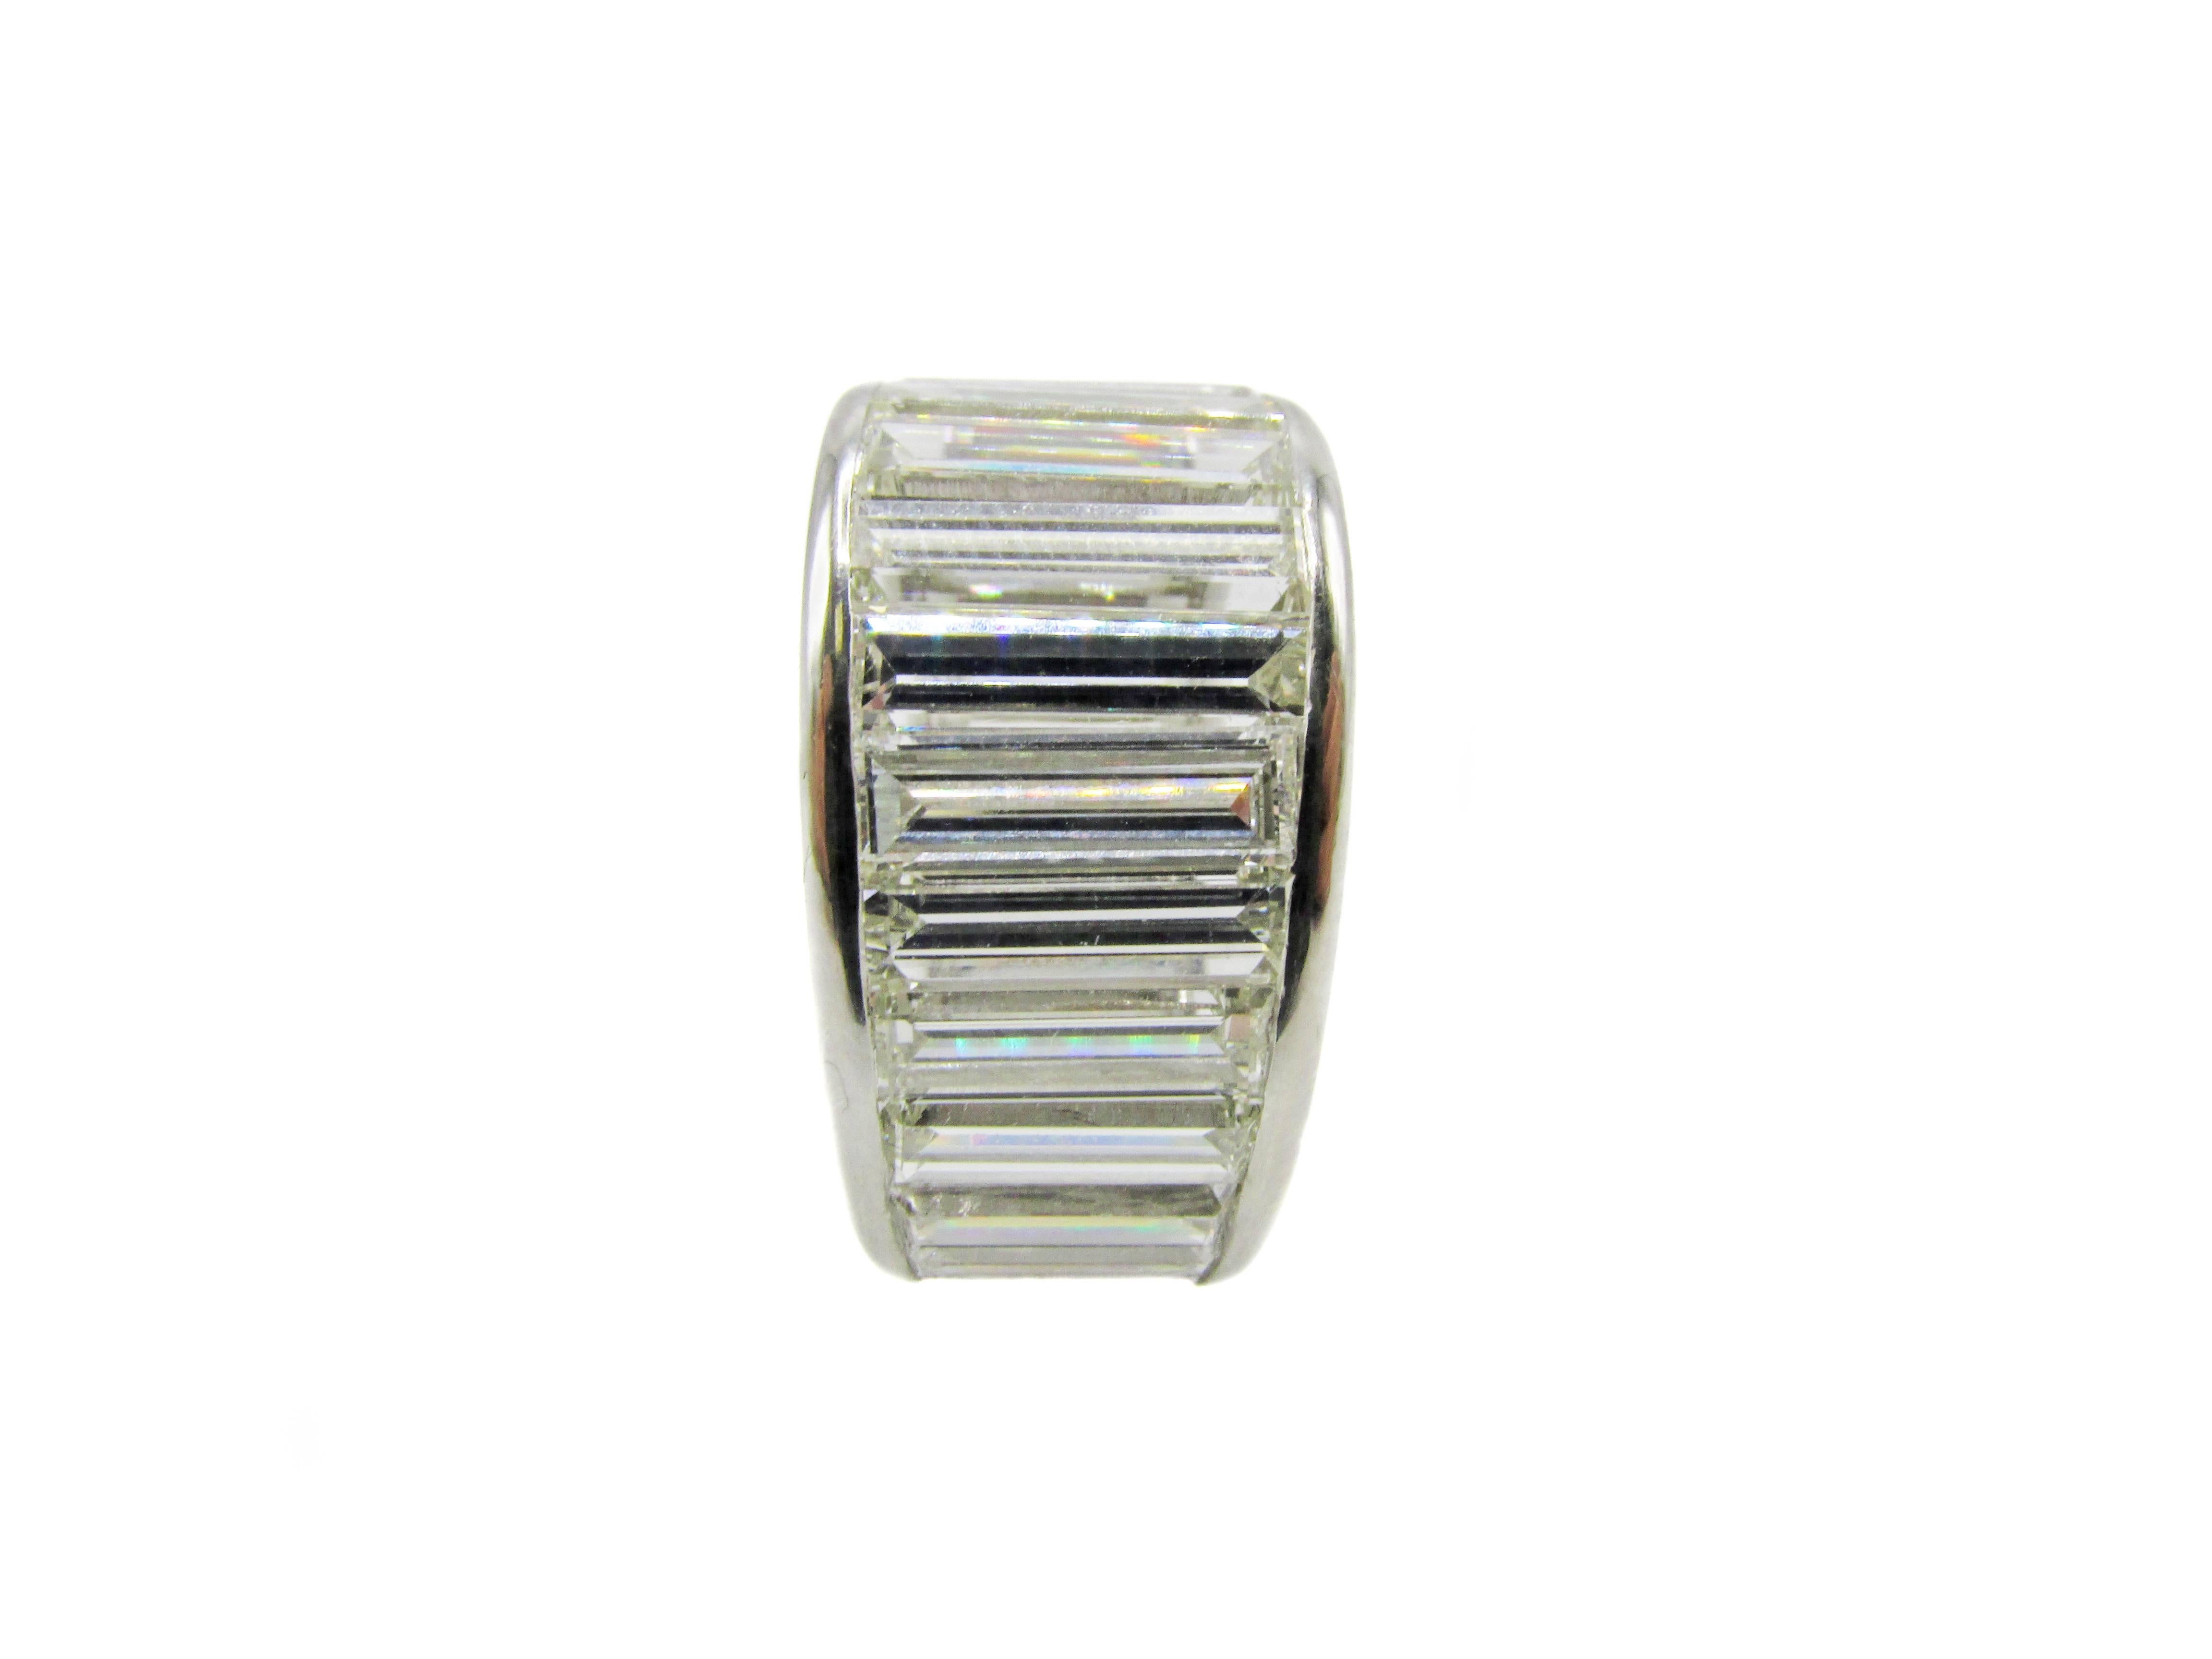 Unique platinum baguette diamond eternity band set with 26 bright white baguette cut diamonds with and approximate total weight of 12.50 carats. The average color of the baguettes is F-G and the clarity VVS-VS. The width of this band is 11.10 mm (